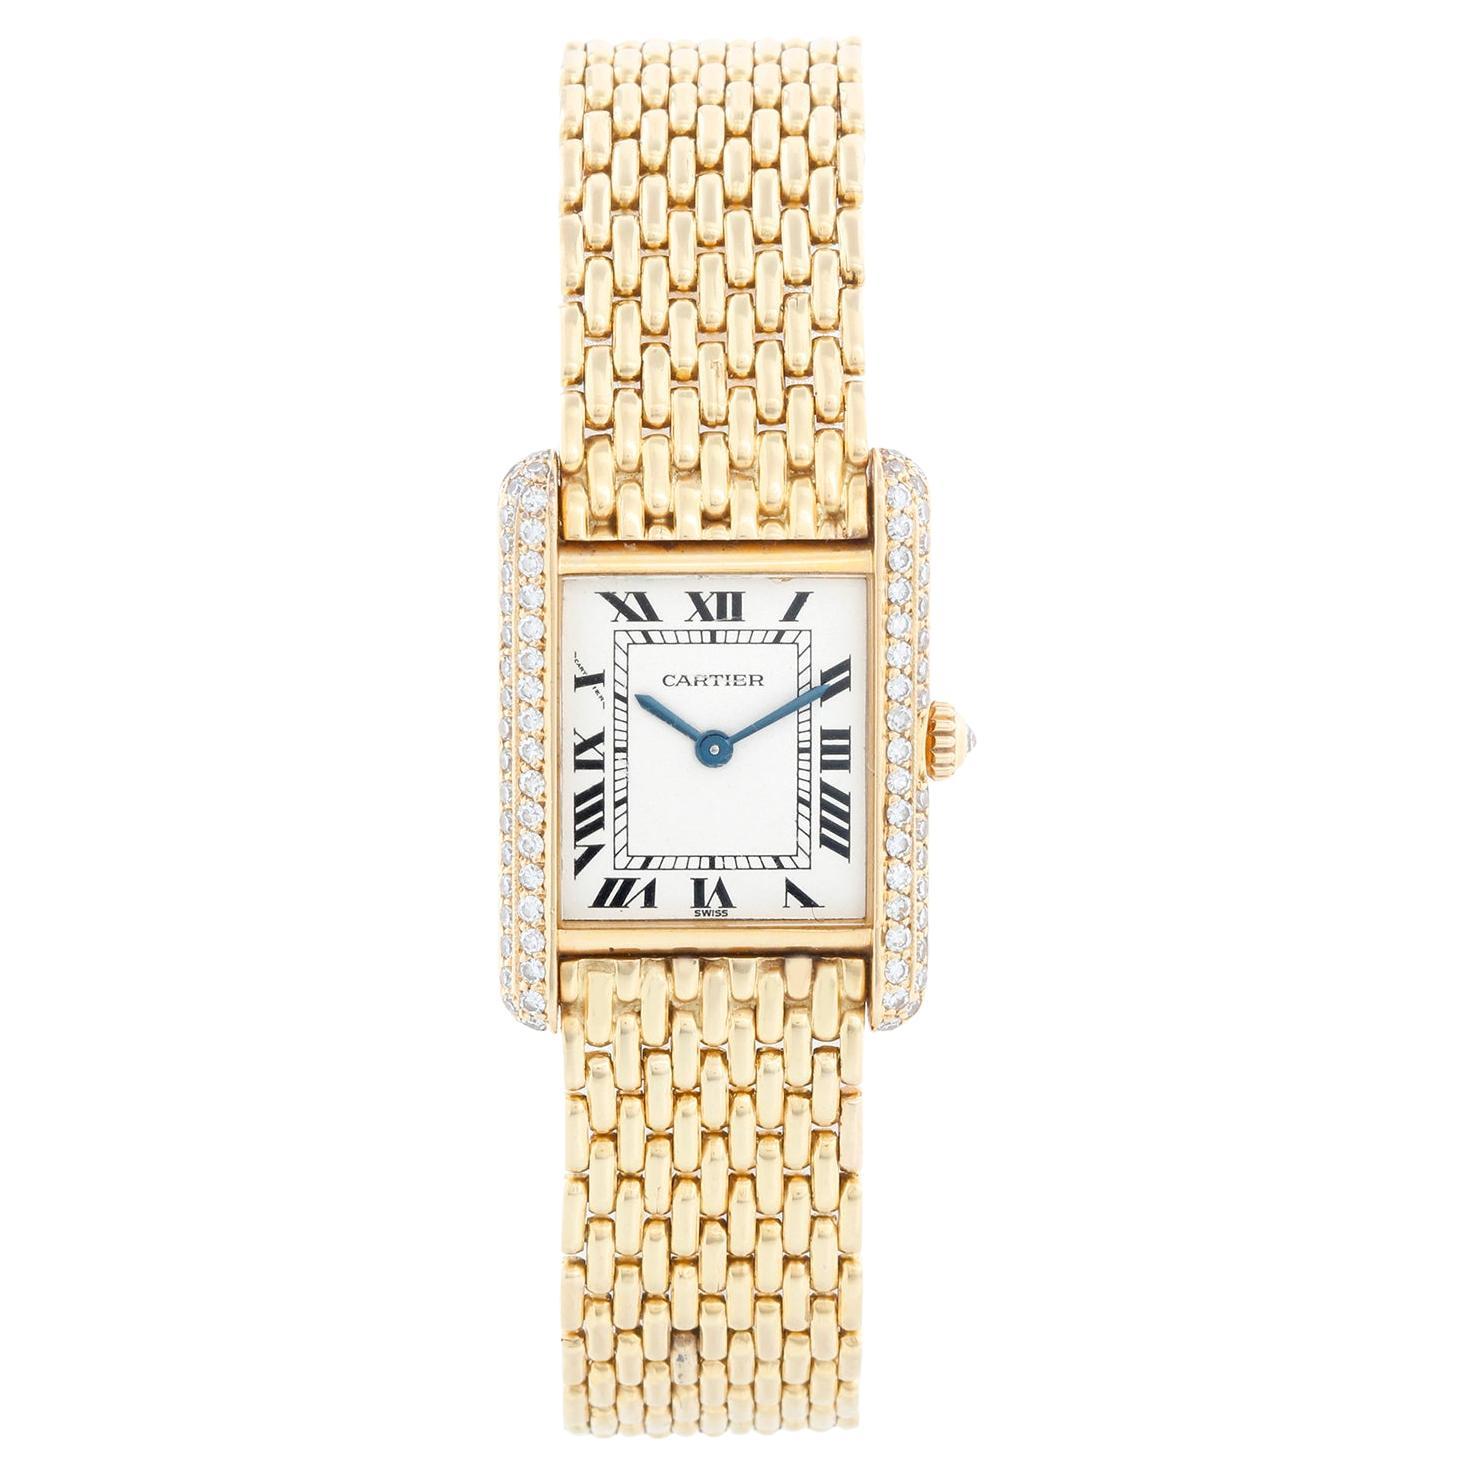 Are Cartier watches made with real gold?